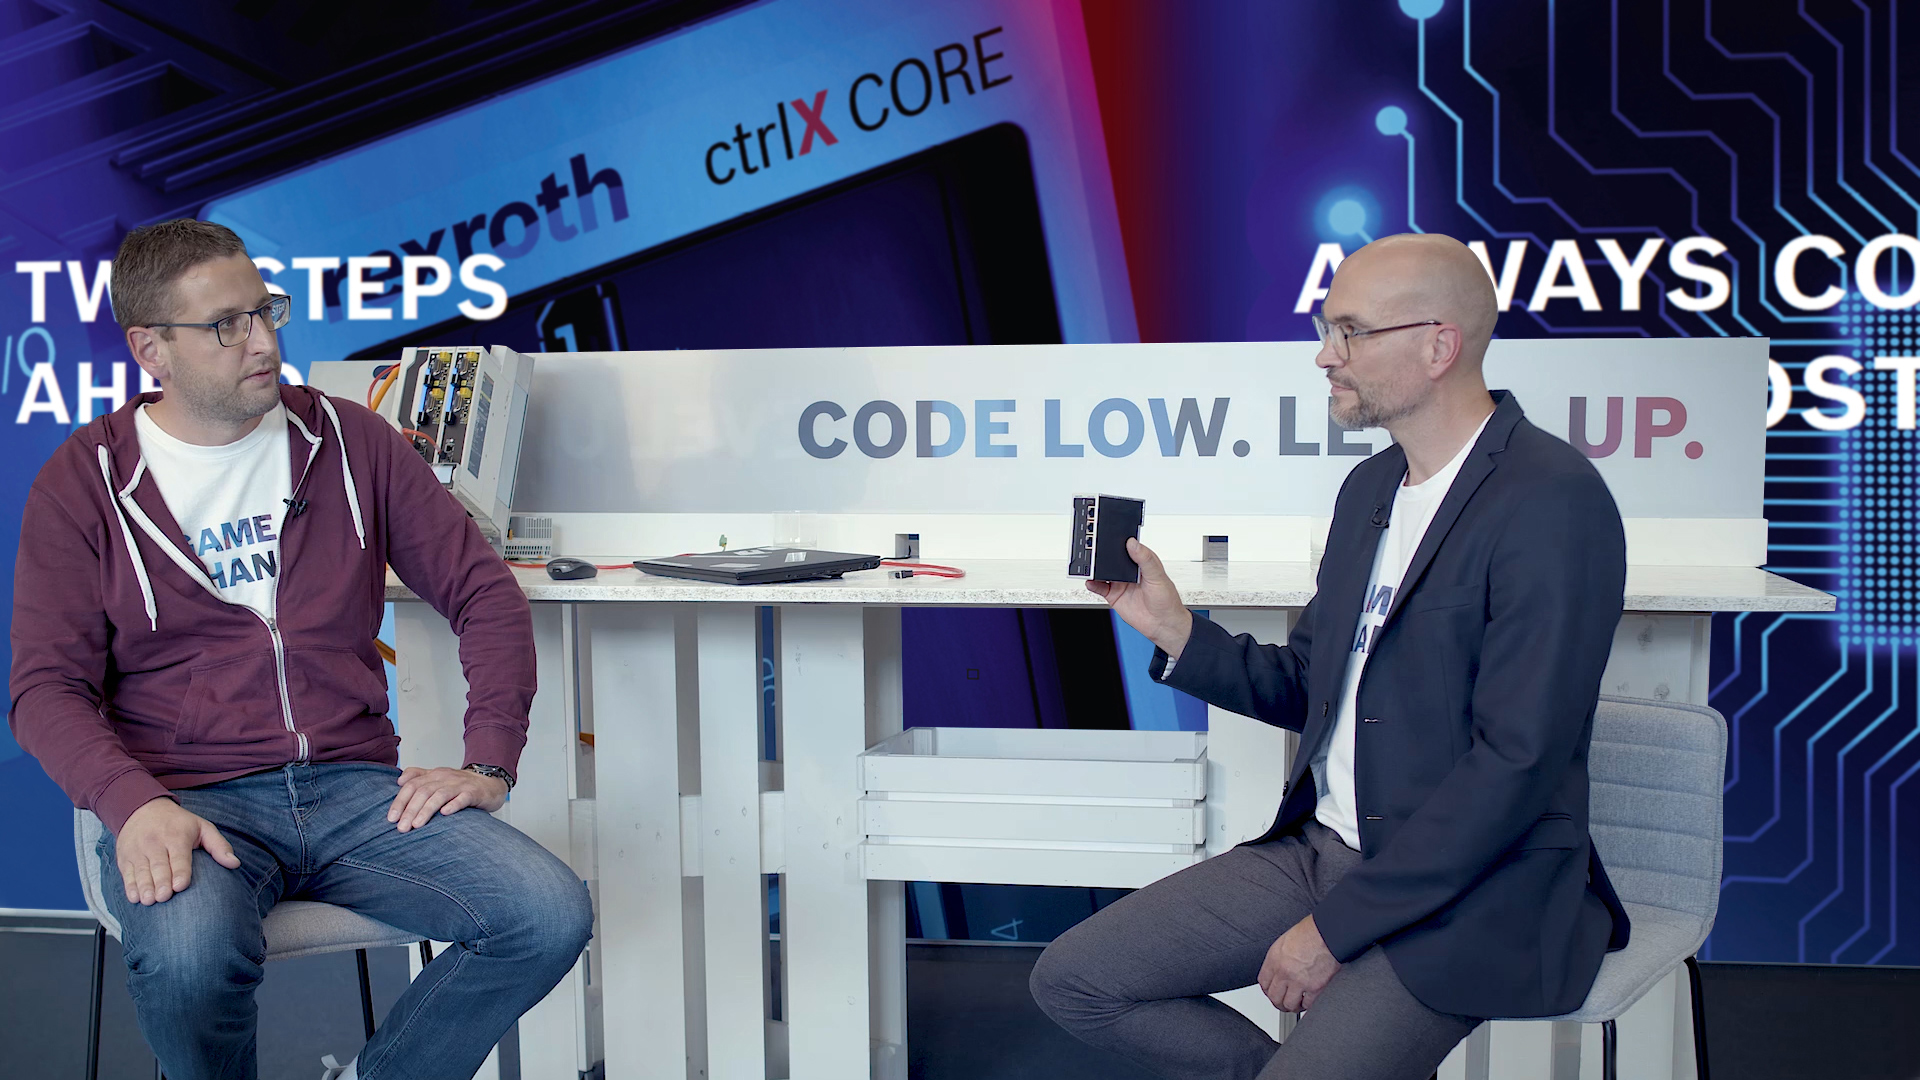 Host Christian Zentraf and his guest Kai Müller sit at a table and talk about the start-up of the ctrlX CORE controller